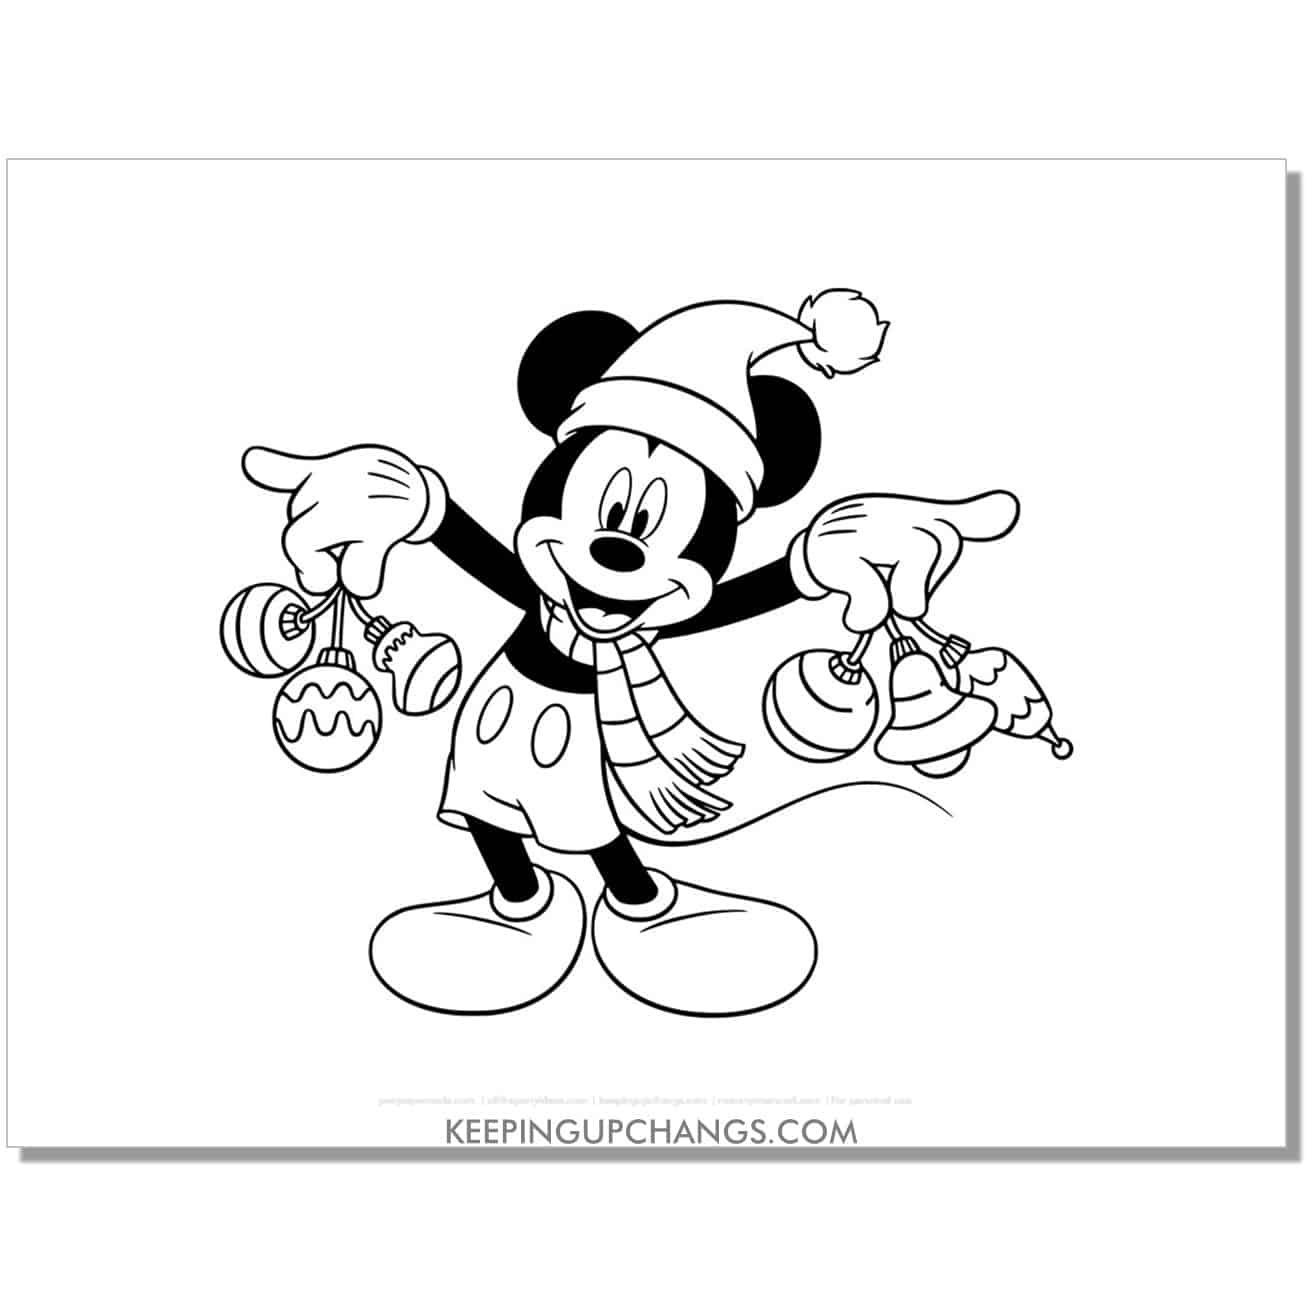 free mickey mouse holding christmas ornaments coloring page, sheet.